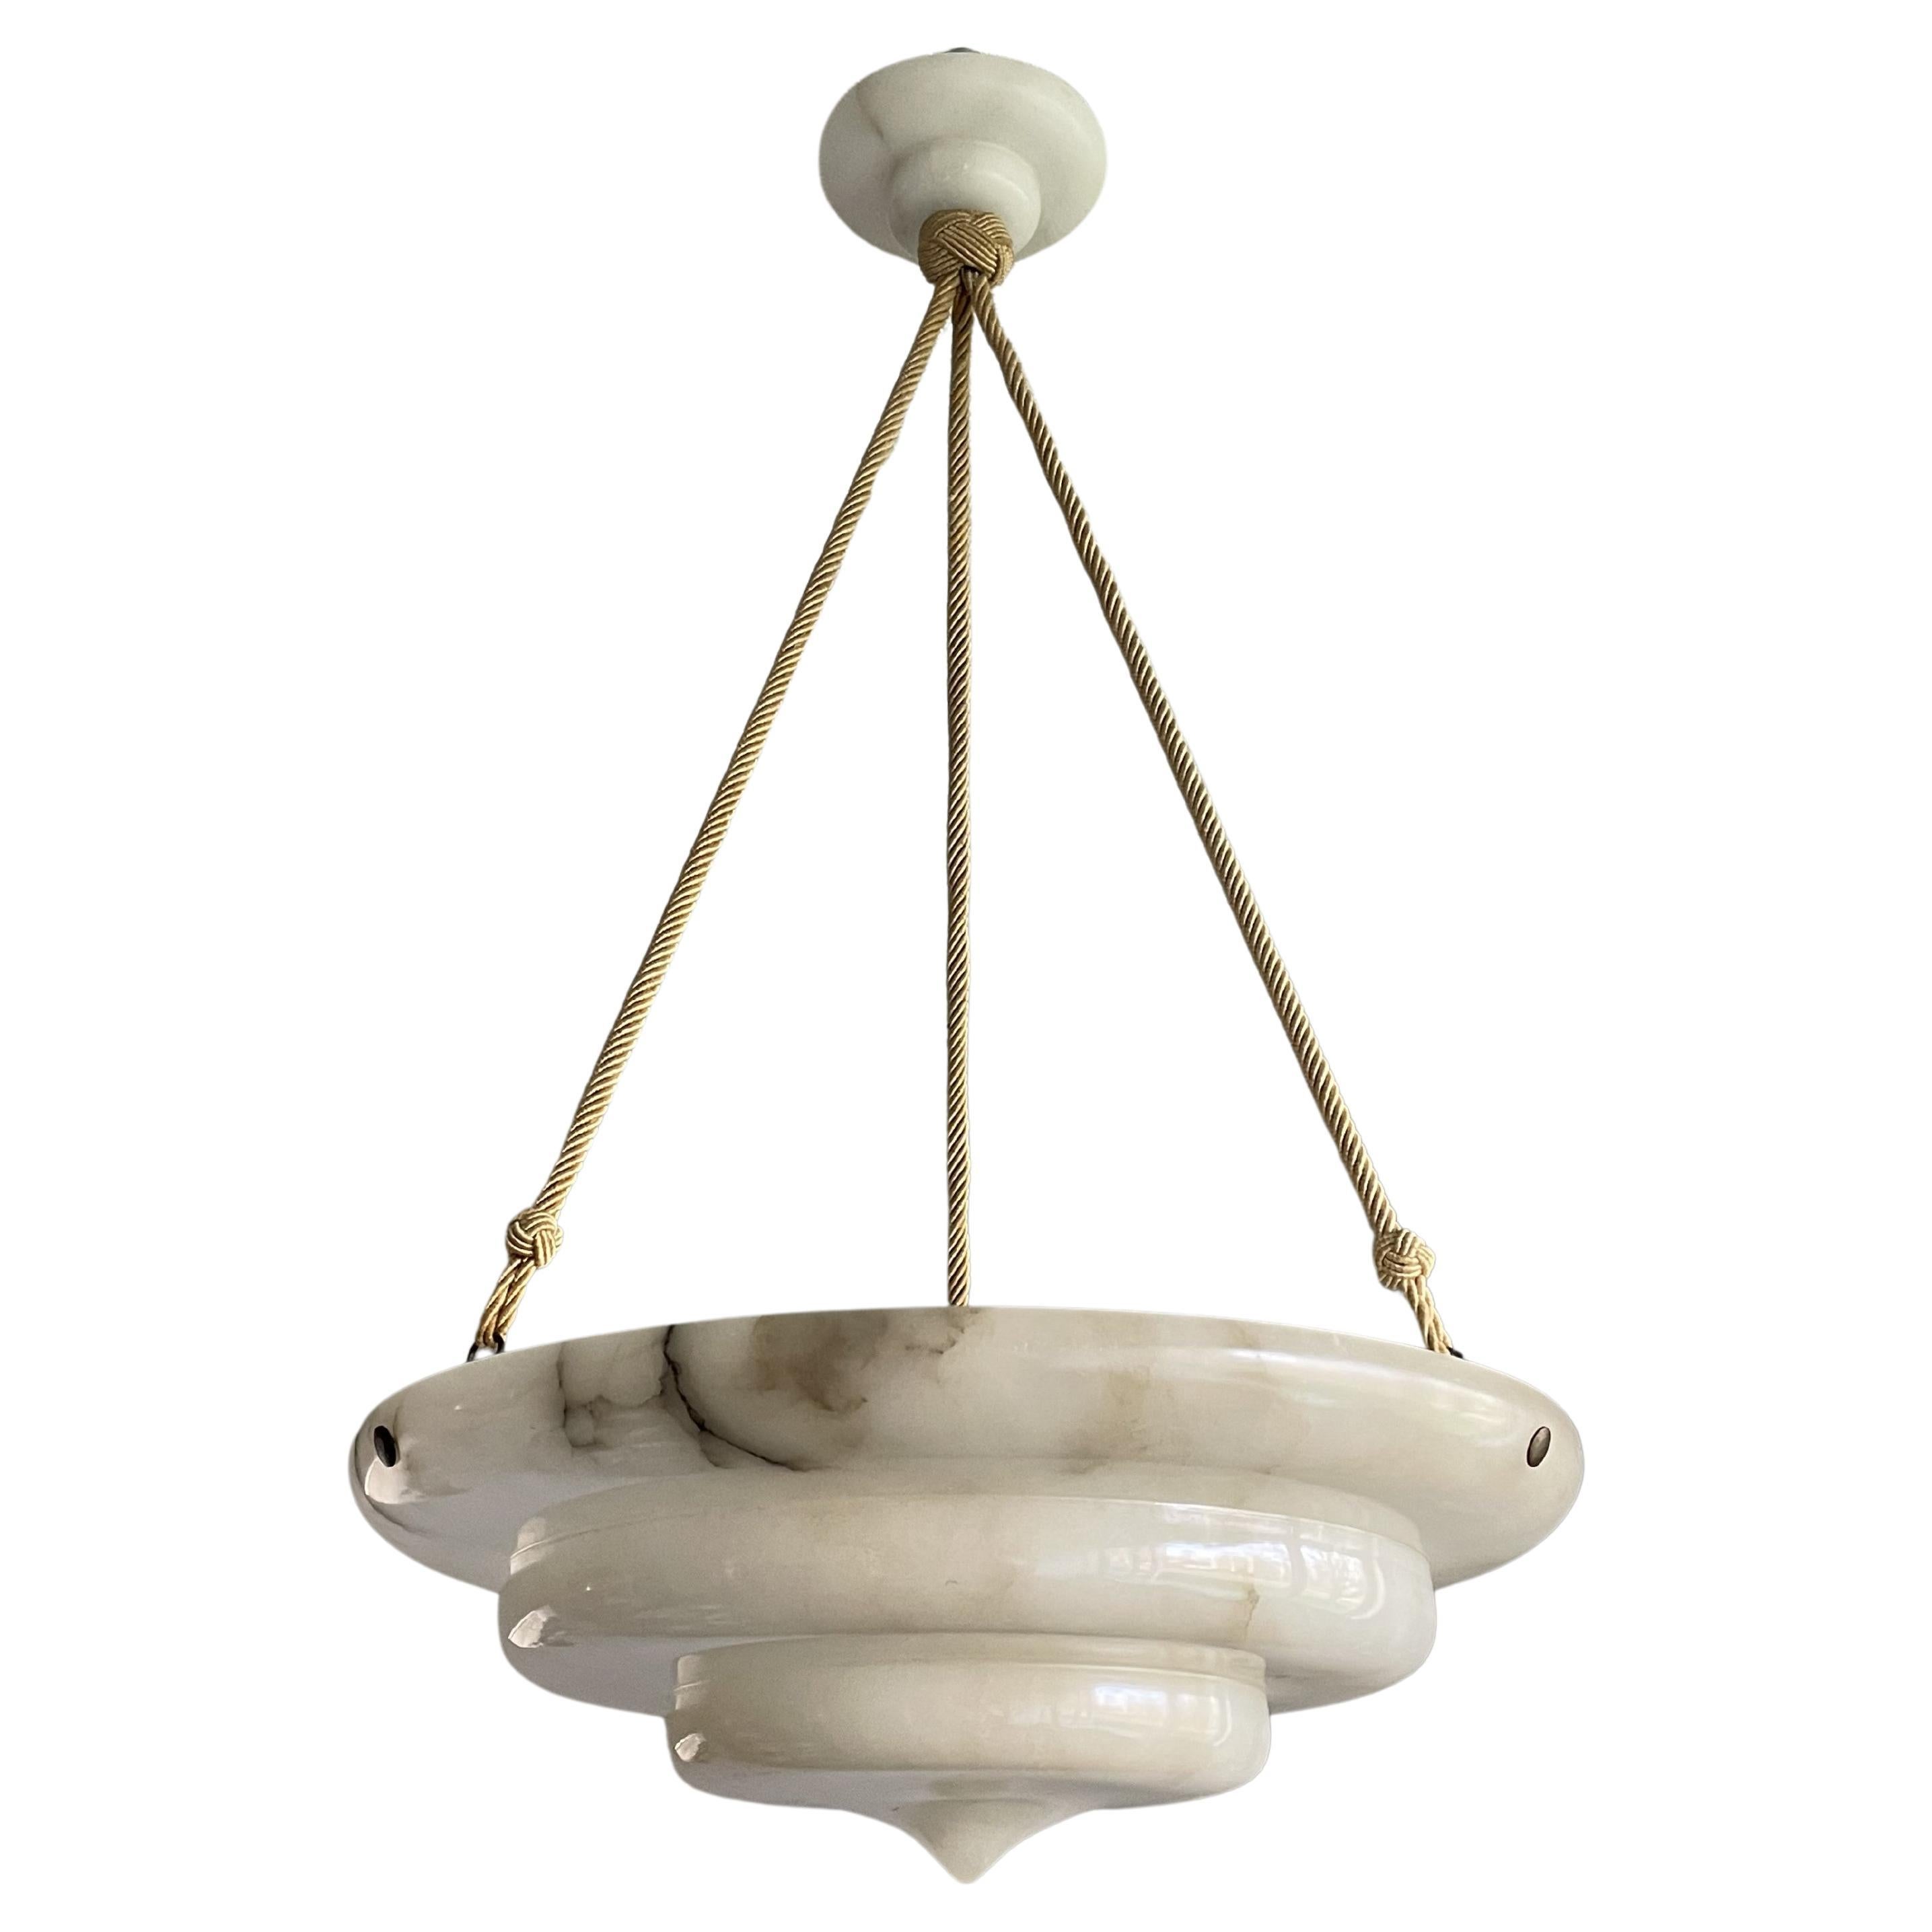 Exceptional Art Deco Hand Carved & Layered Alabaster Pendant Light w. Rope Chain